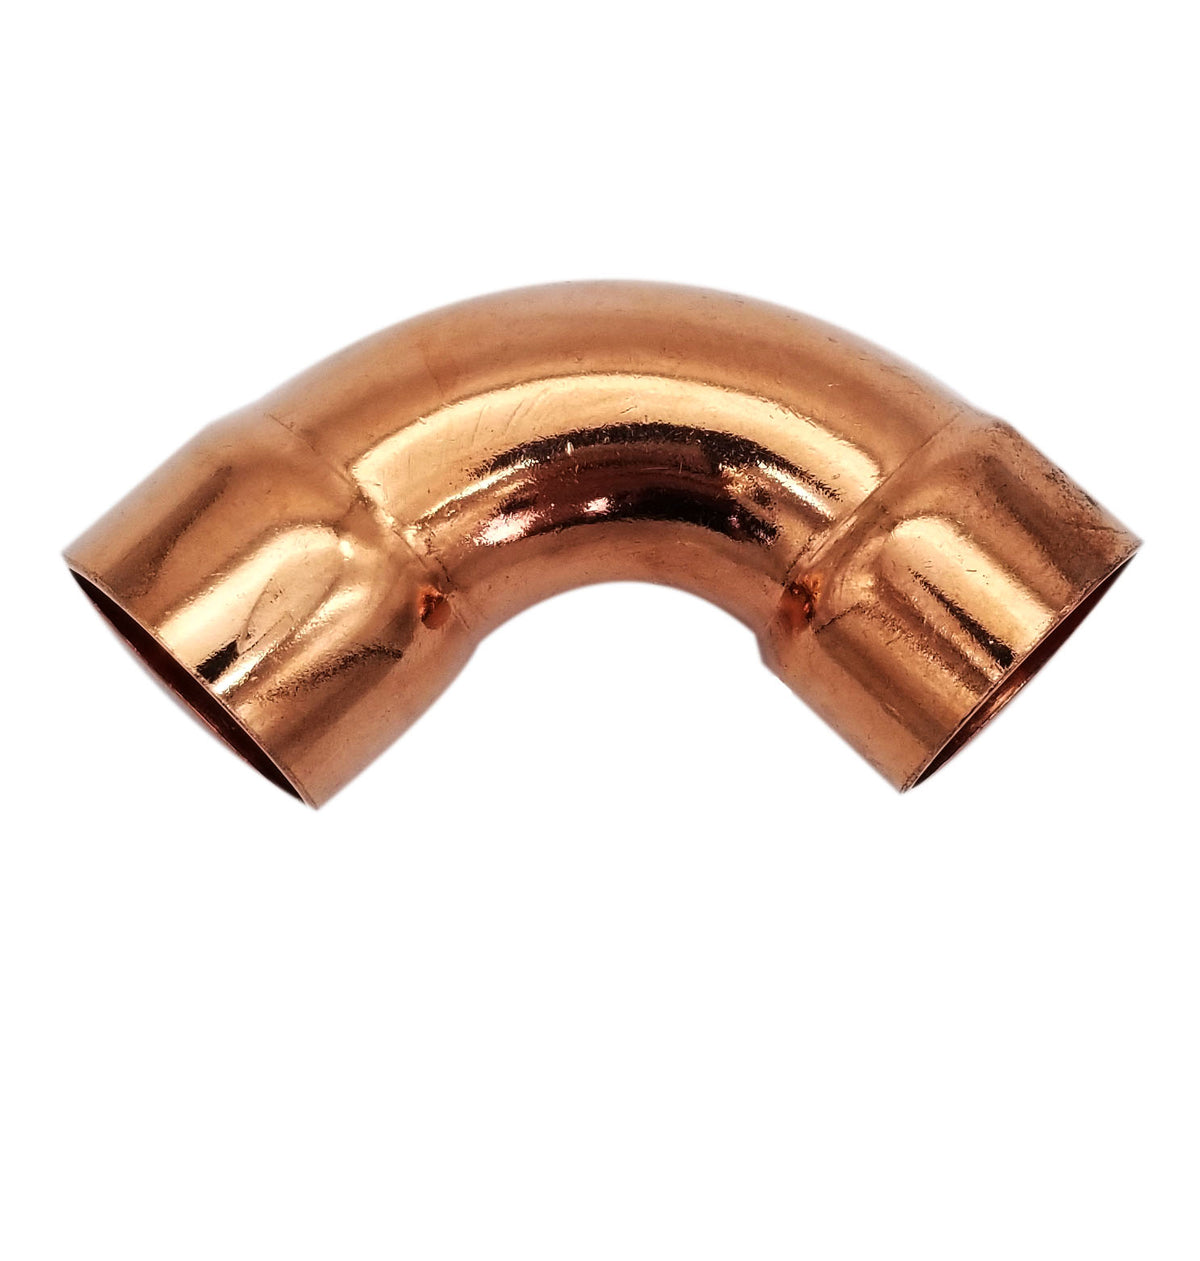 1-1/8 Inch (HVAC Outer Dimension) 1 Inch (Plumbing Inner Dimension) - Copper Long Radius 90° Elbow Fitting with 2 Solder Cups For Plumbing &amp; HVAC – 99.9% Pure Copper - 5 Pack